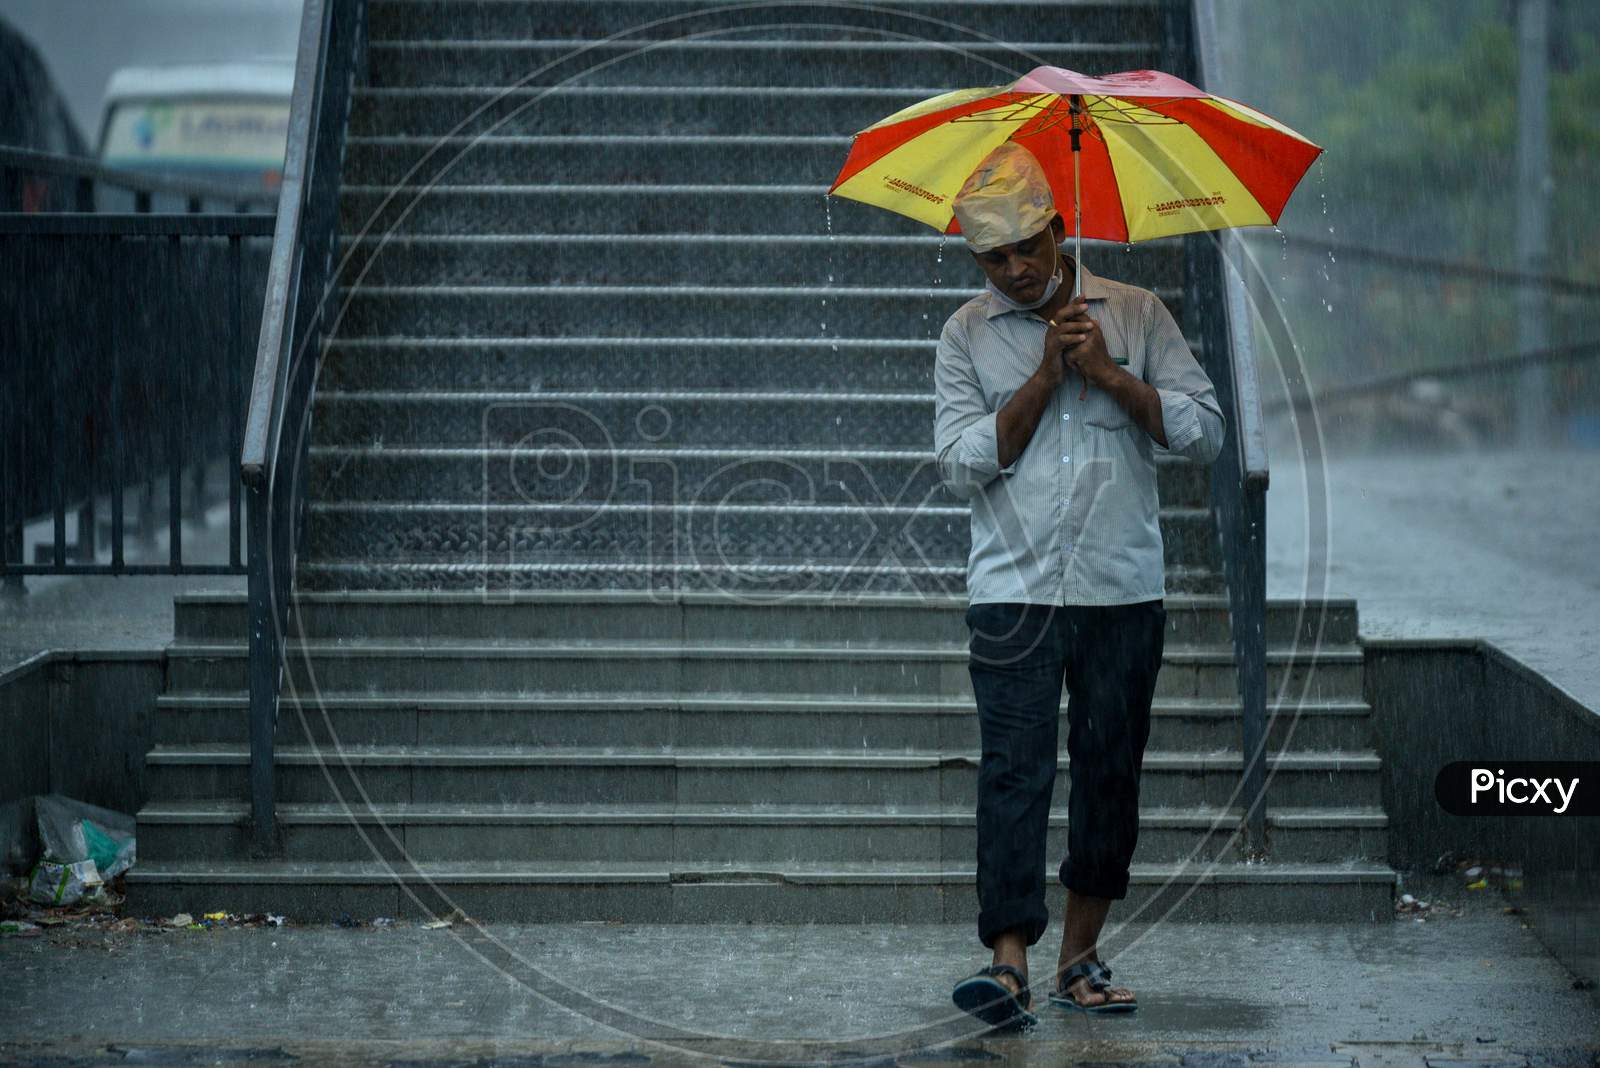 a man walks with an umbrella as it rains heavily in KPHB, Hyderabad, May 31, 2020.